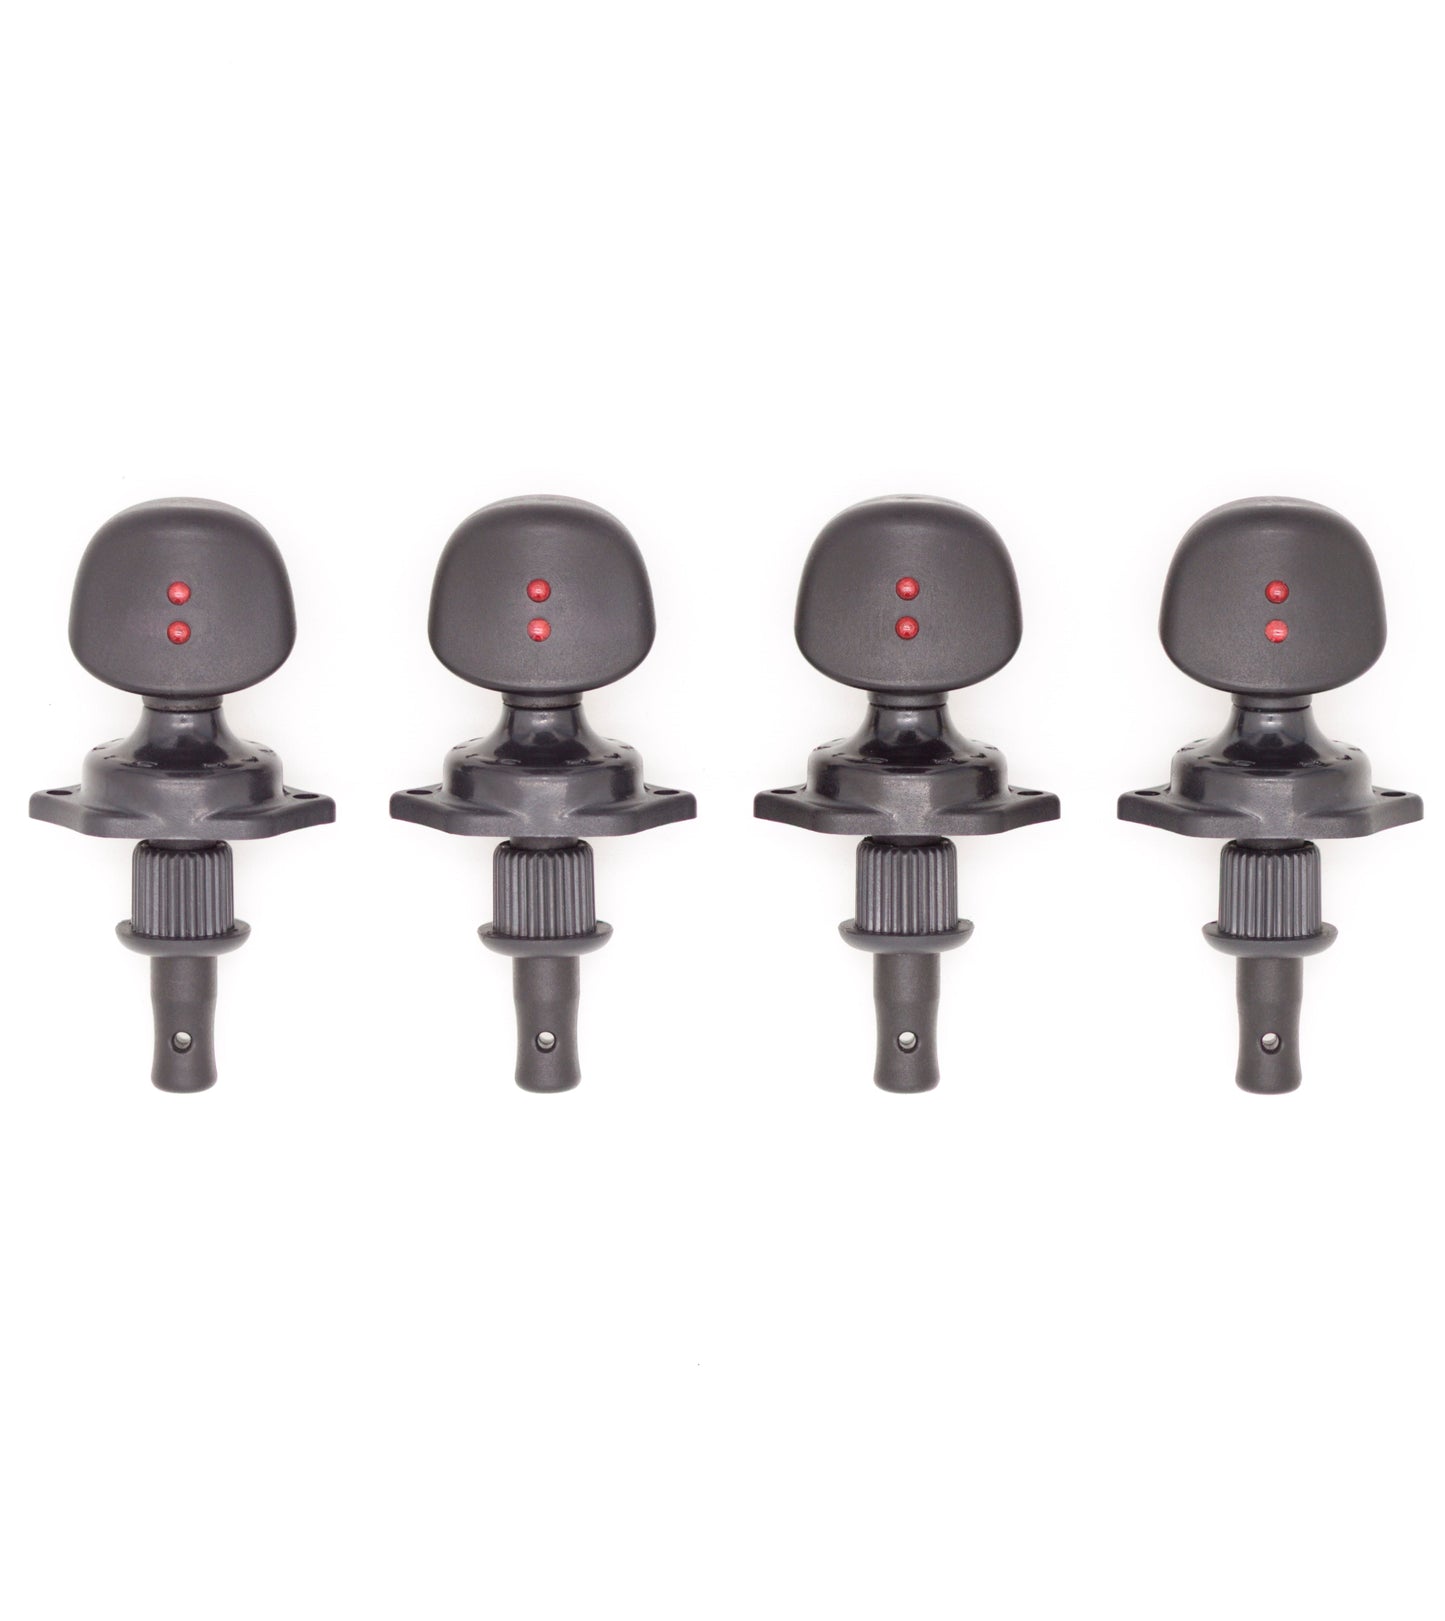 Ratio Tune-a-Lele Ukulele Tuners 6:1 with Large Buttons (4 pcs) - Graph Tech Guitar Labs